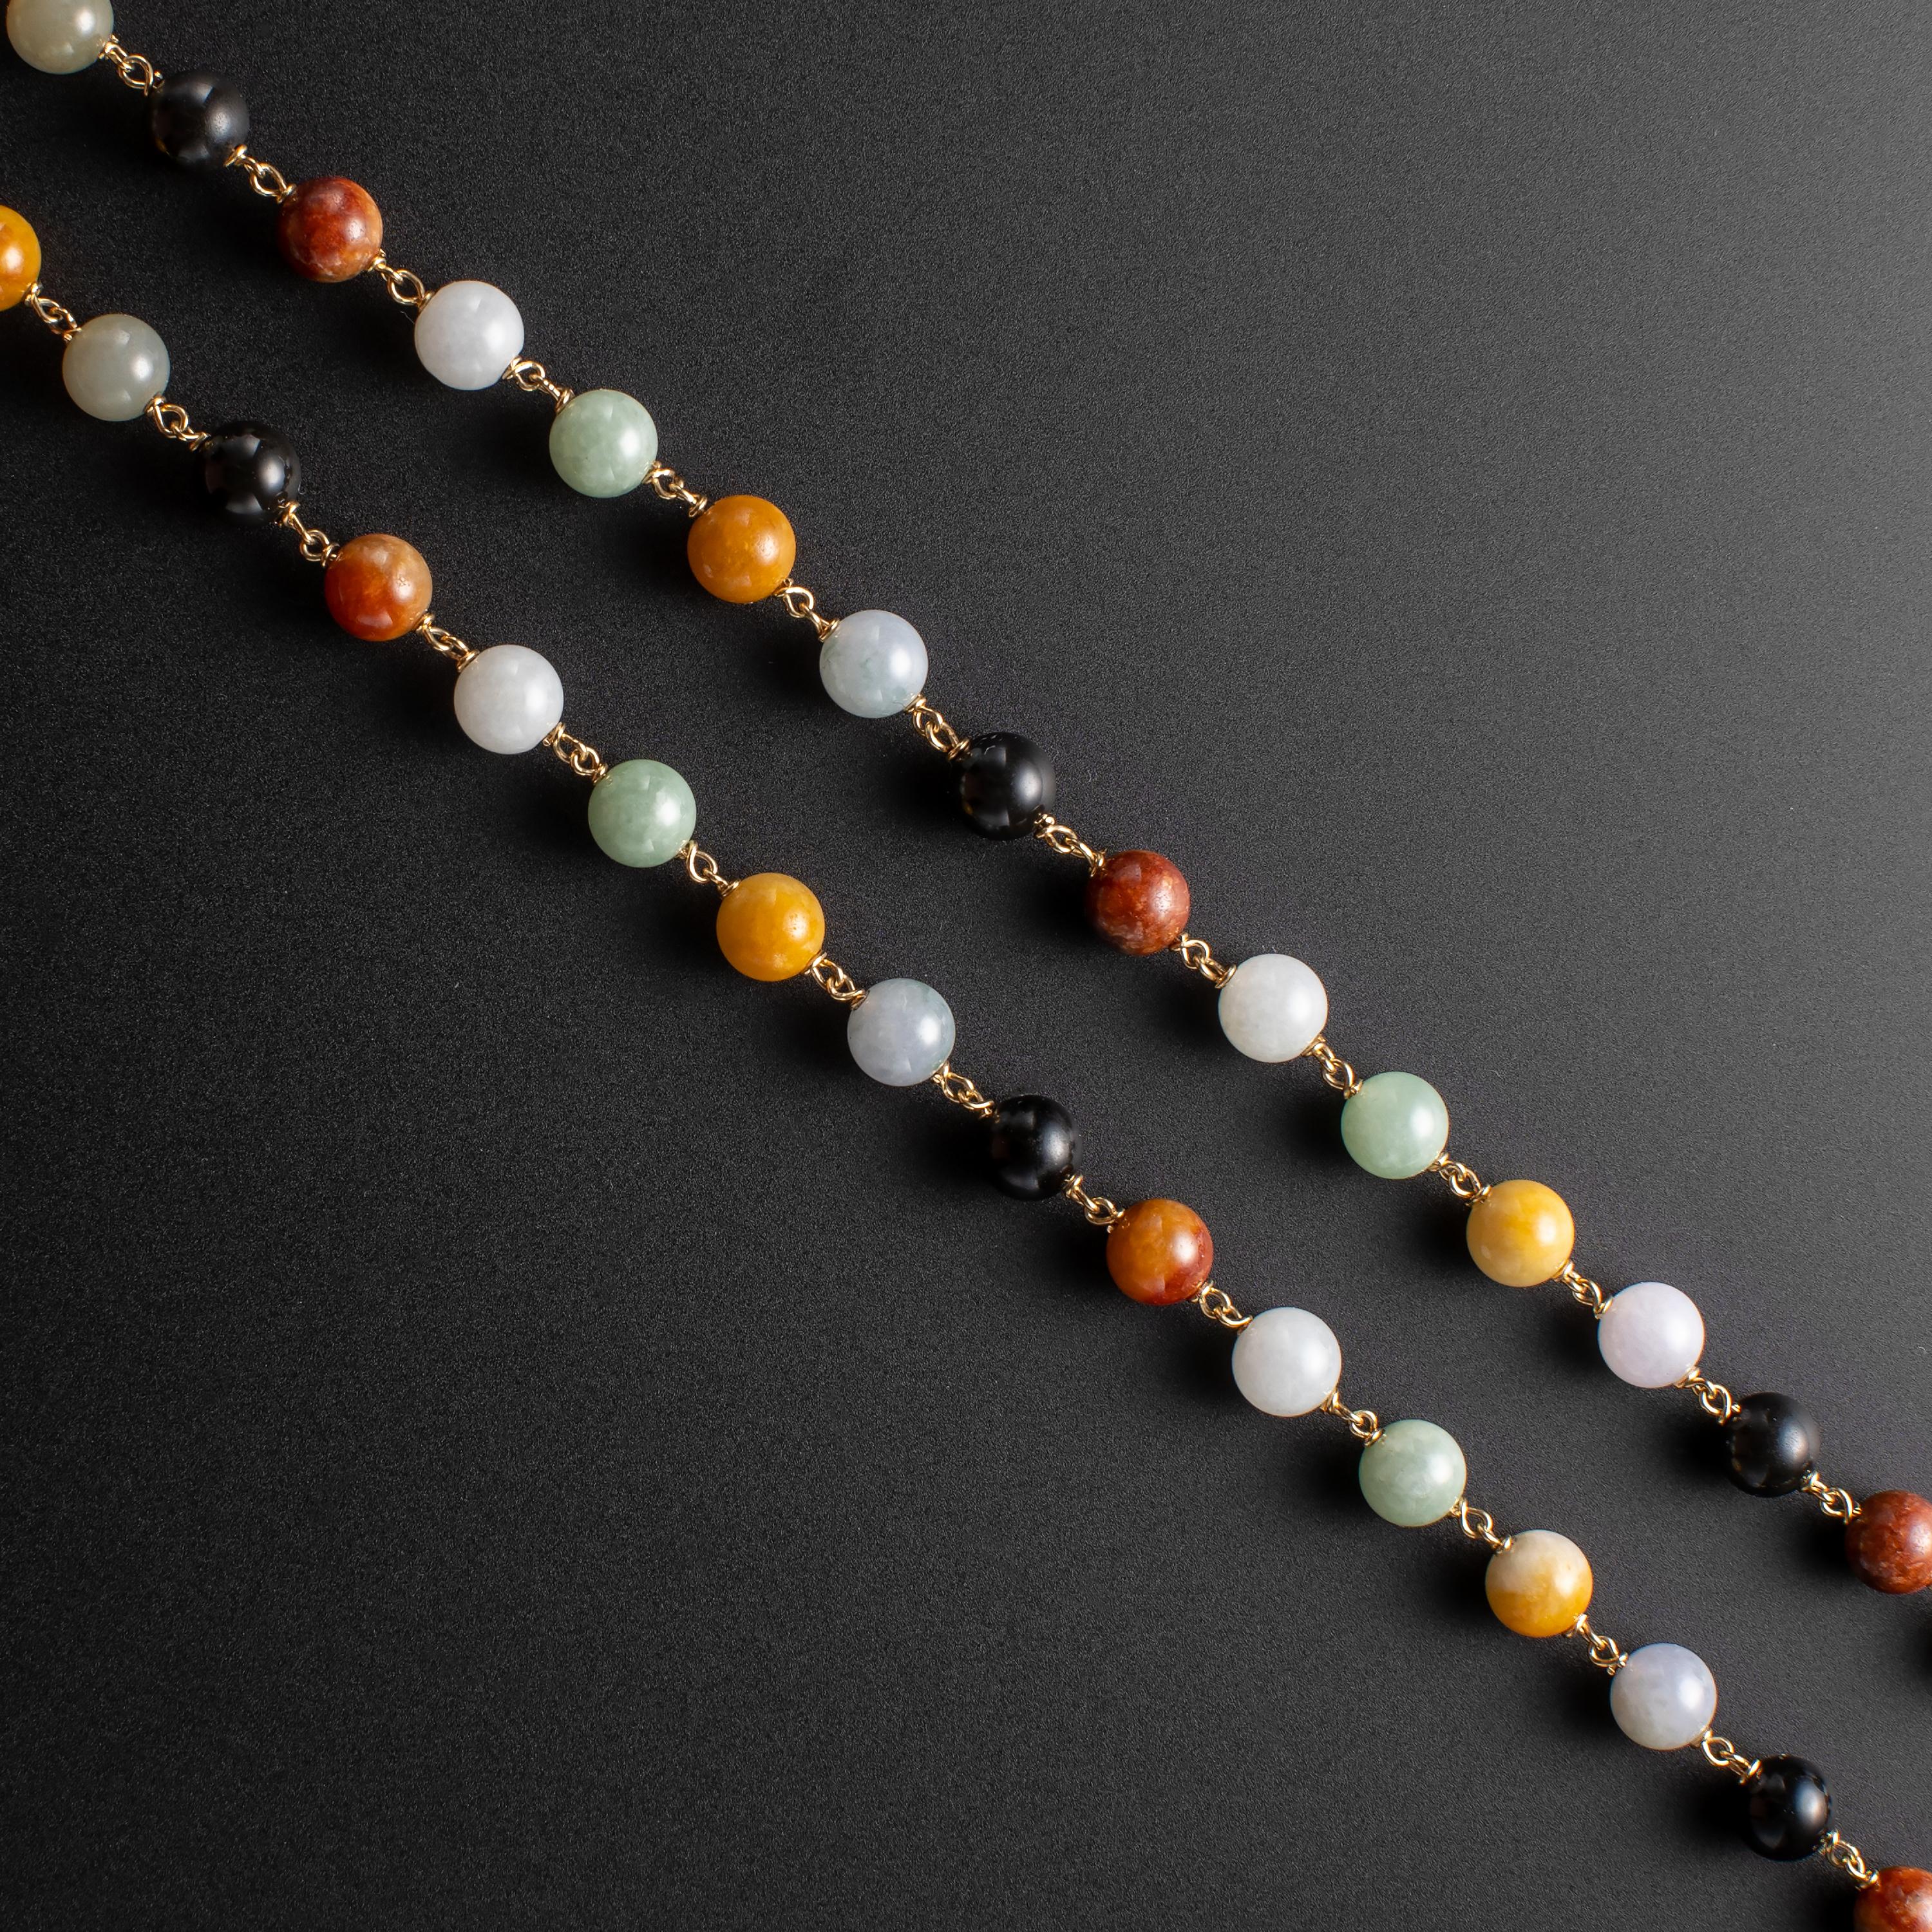 This multicolor jade necklace from the 1950s or thereabouts was created by the venerable Hawaiian jewelry store, Ming's. Like Gump's in San Francisco, Ming's became known worldwide for their fine jade jewelry, always created using only 100% natural